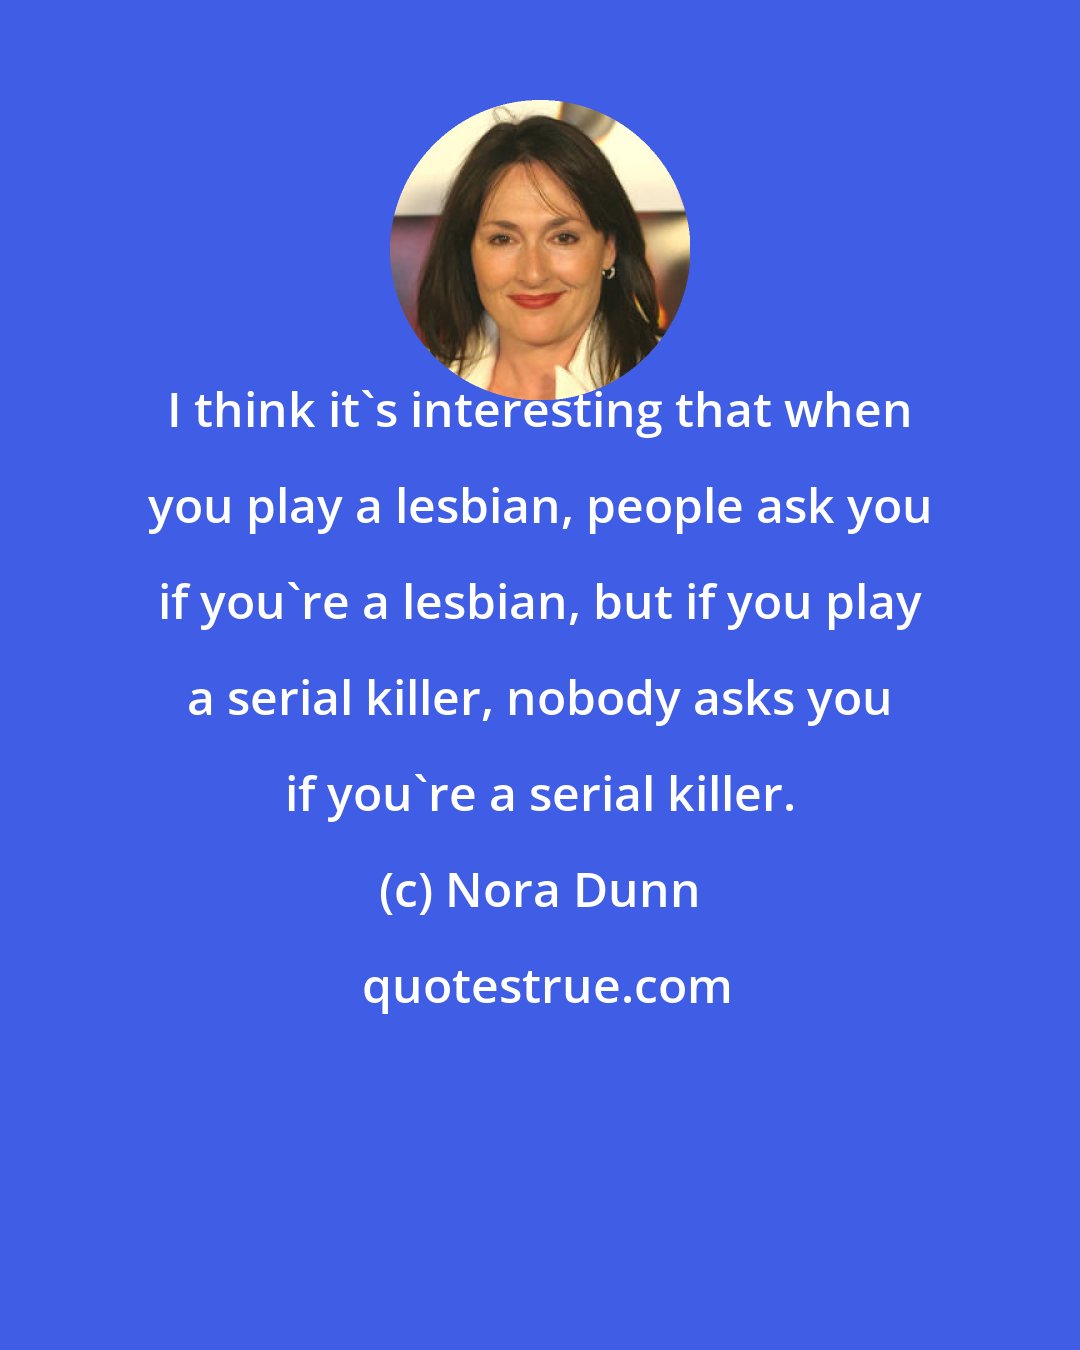 Nora Dunn: I think it's interesting that when you play a lesbian, people ask you if you're a lesbian, but if you play a serial killer, nobody asks you if you're a serial killer.